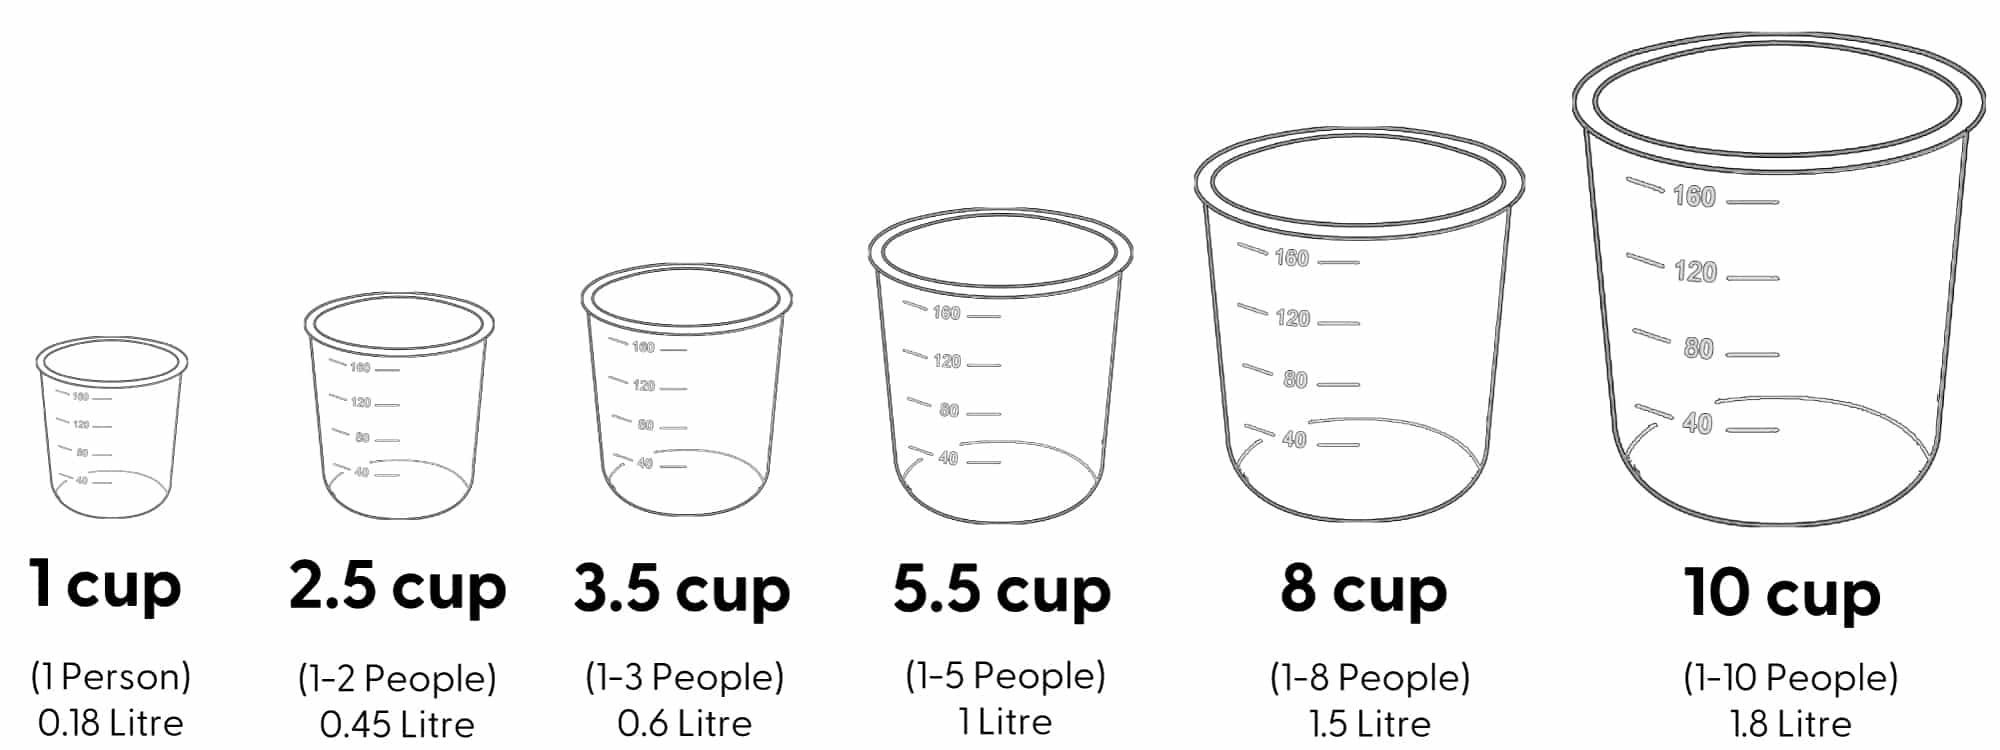 Yum Asia Measuring Cup Capacities